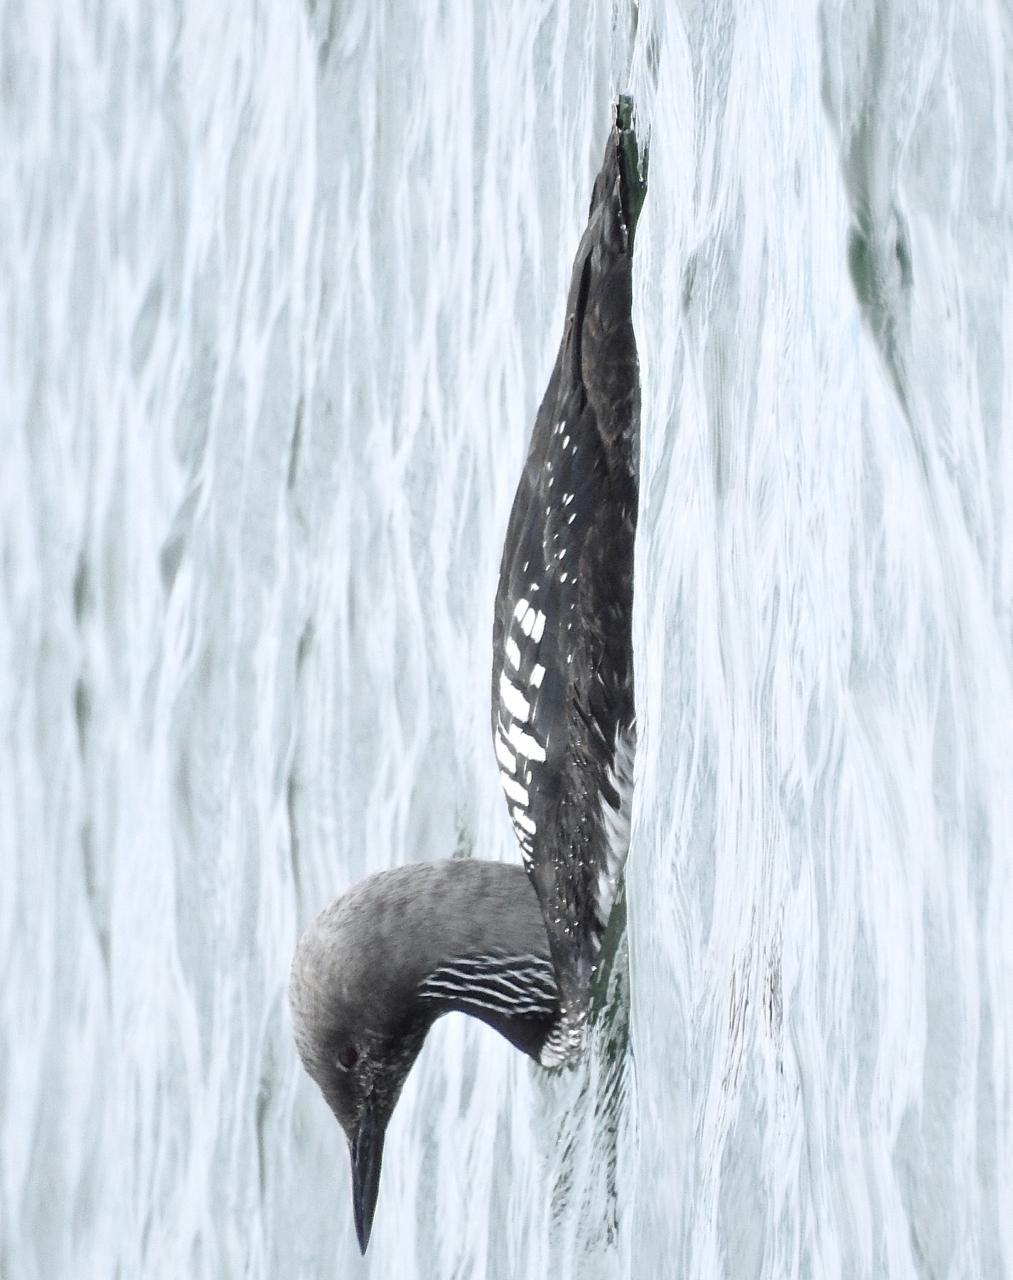 Pacific Loon Photo by Brian Avent